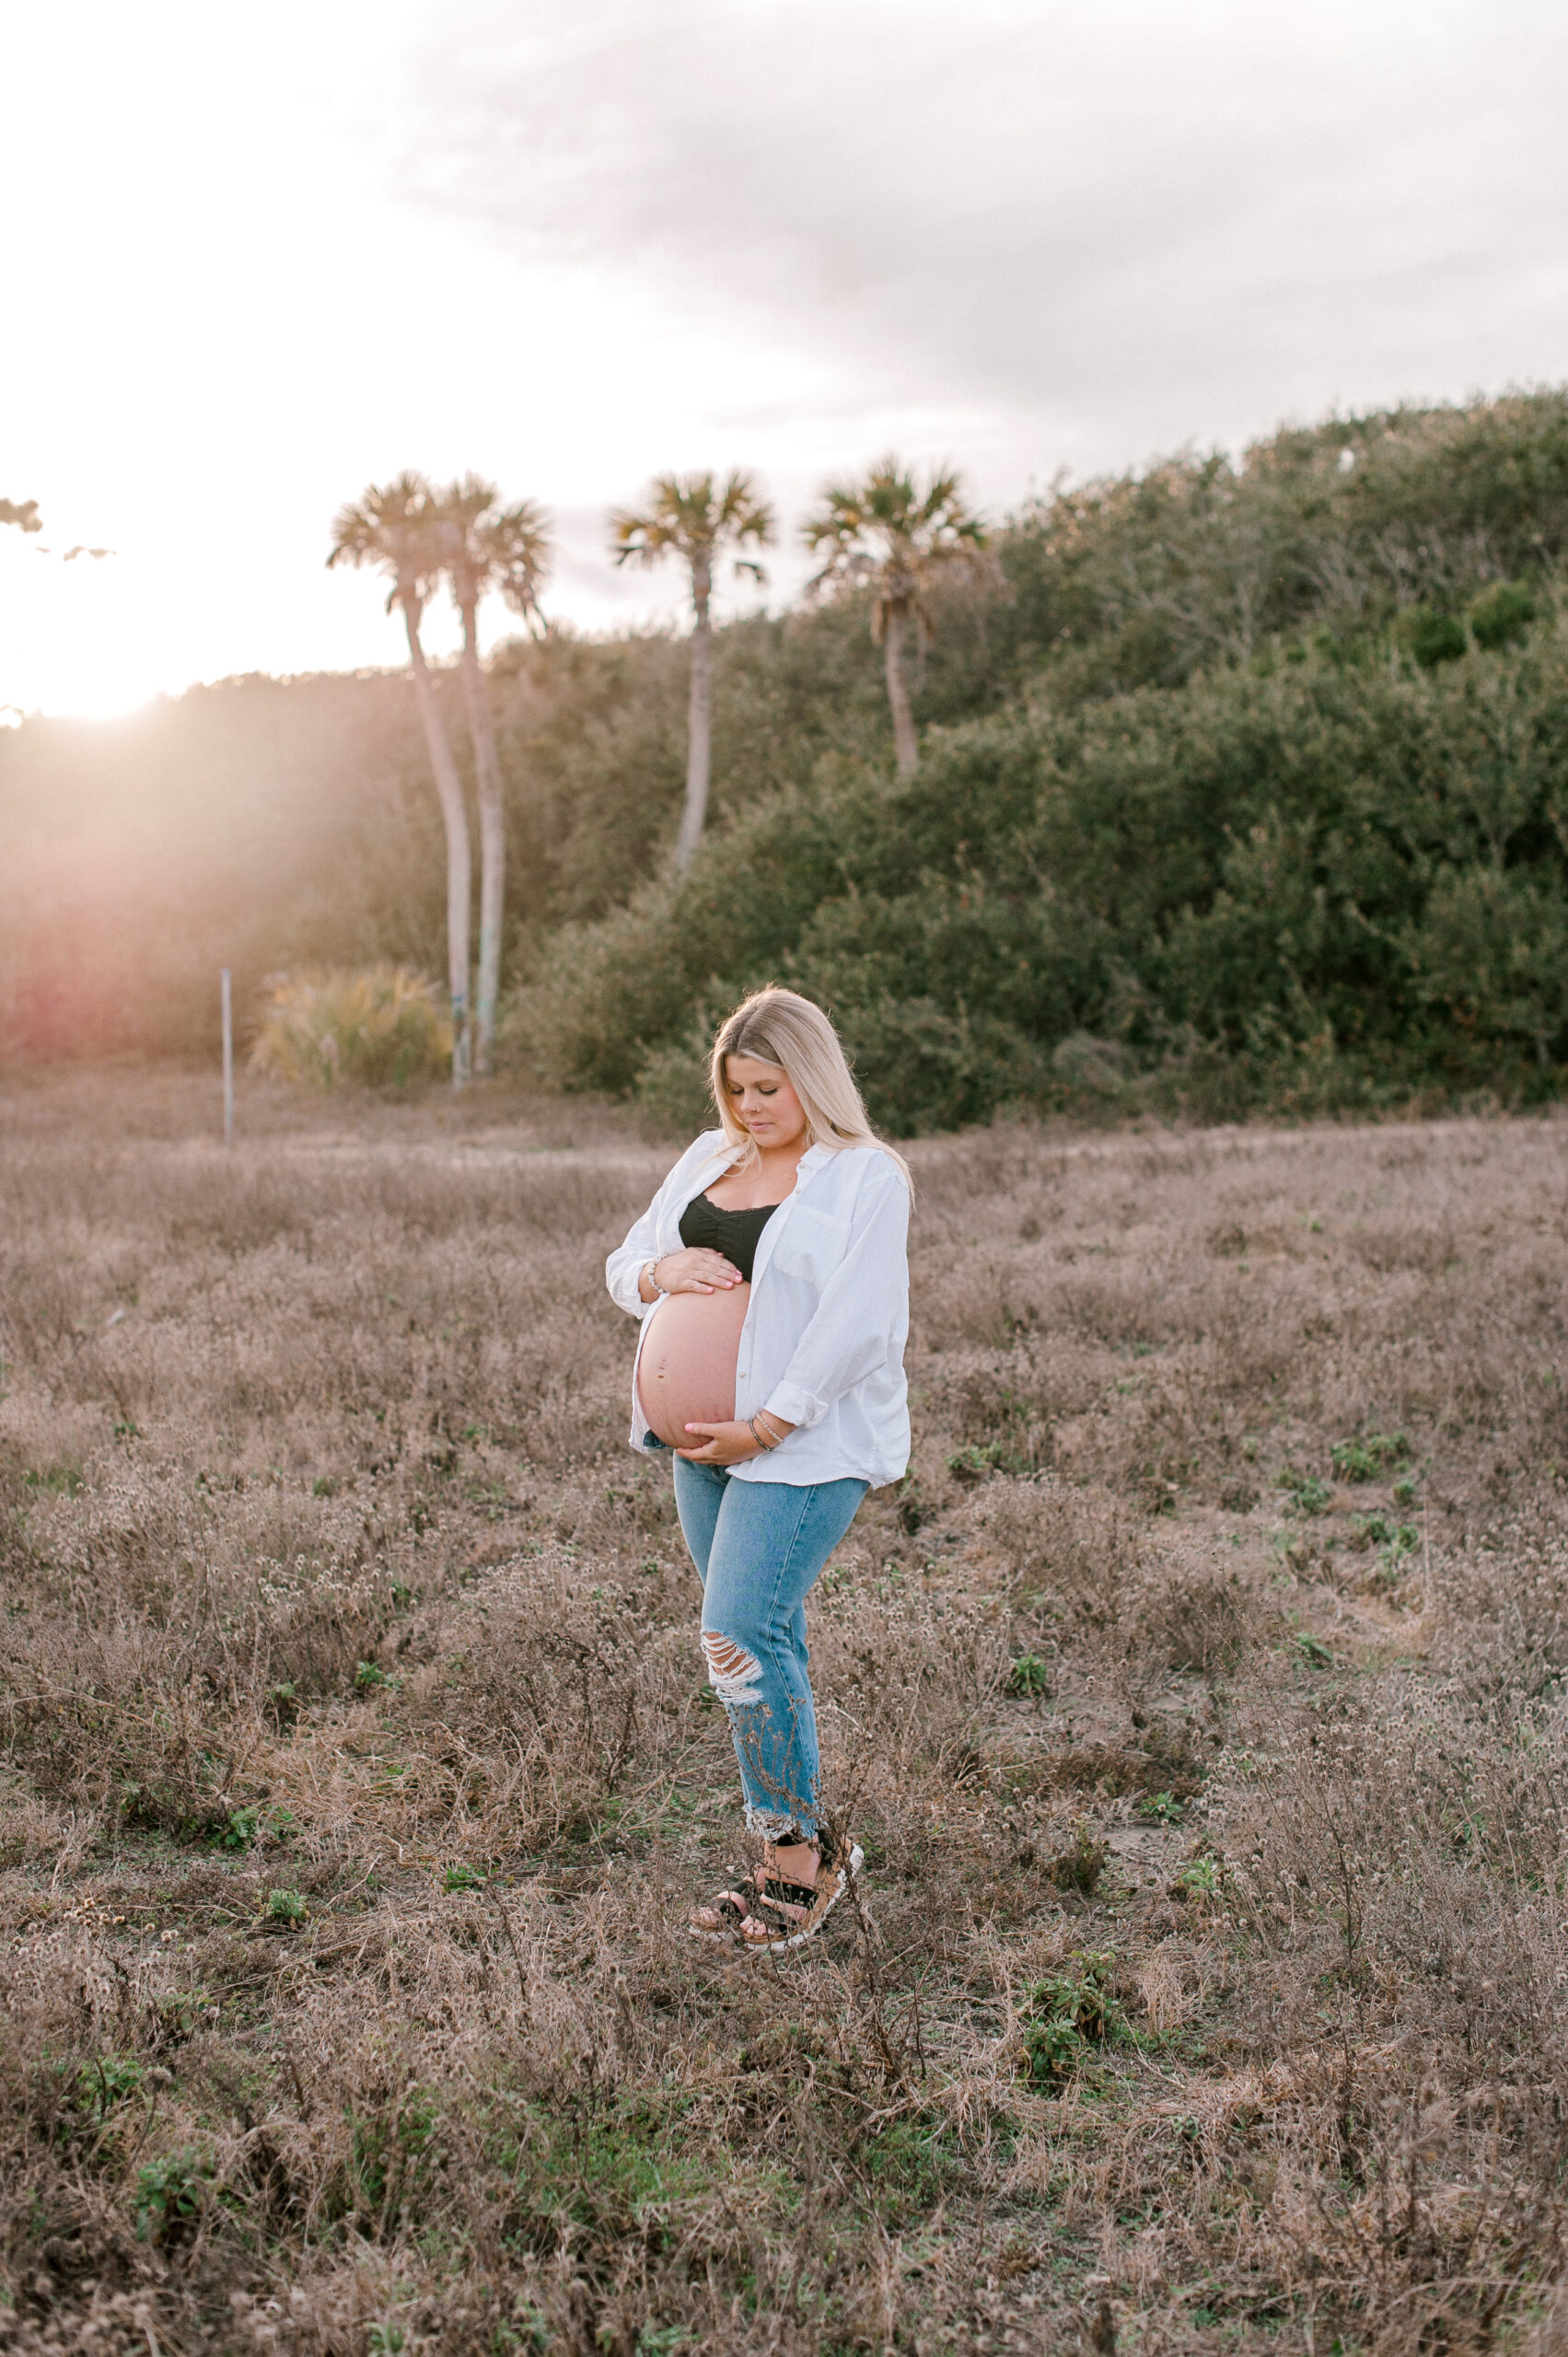 IVF mama holding her belly reflecting on her pregnancy journey at sunset in a field. 